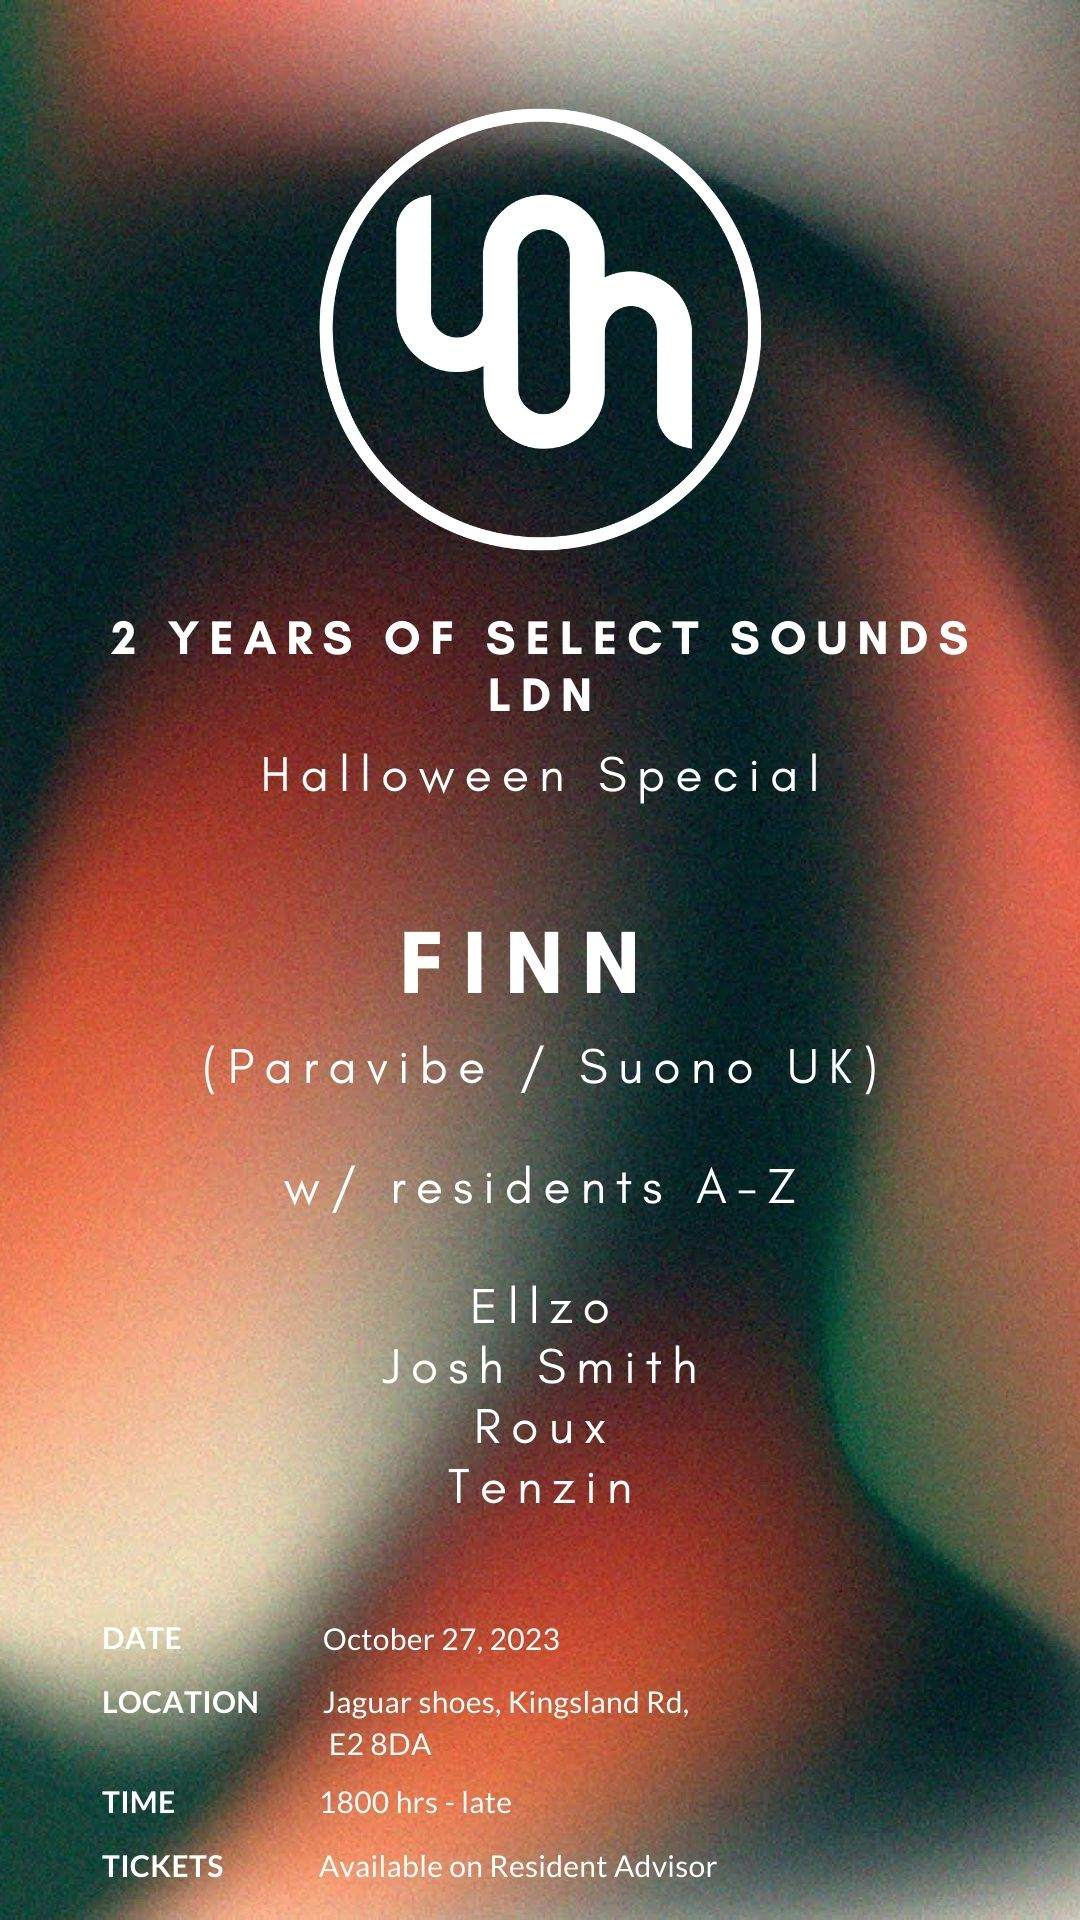 2 Years of Select Sounds Ldn - Halloween Special - Página frontal